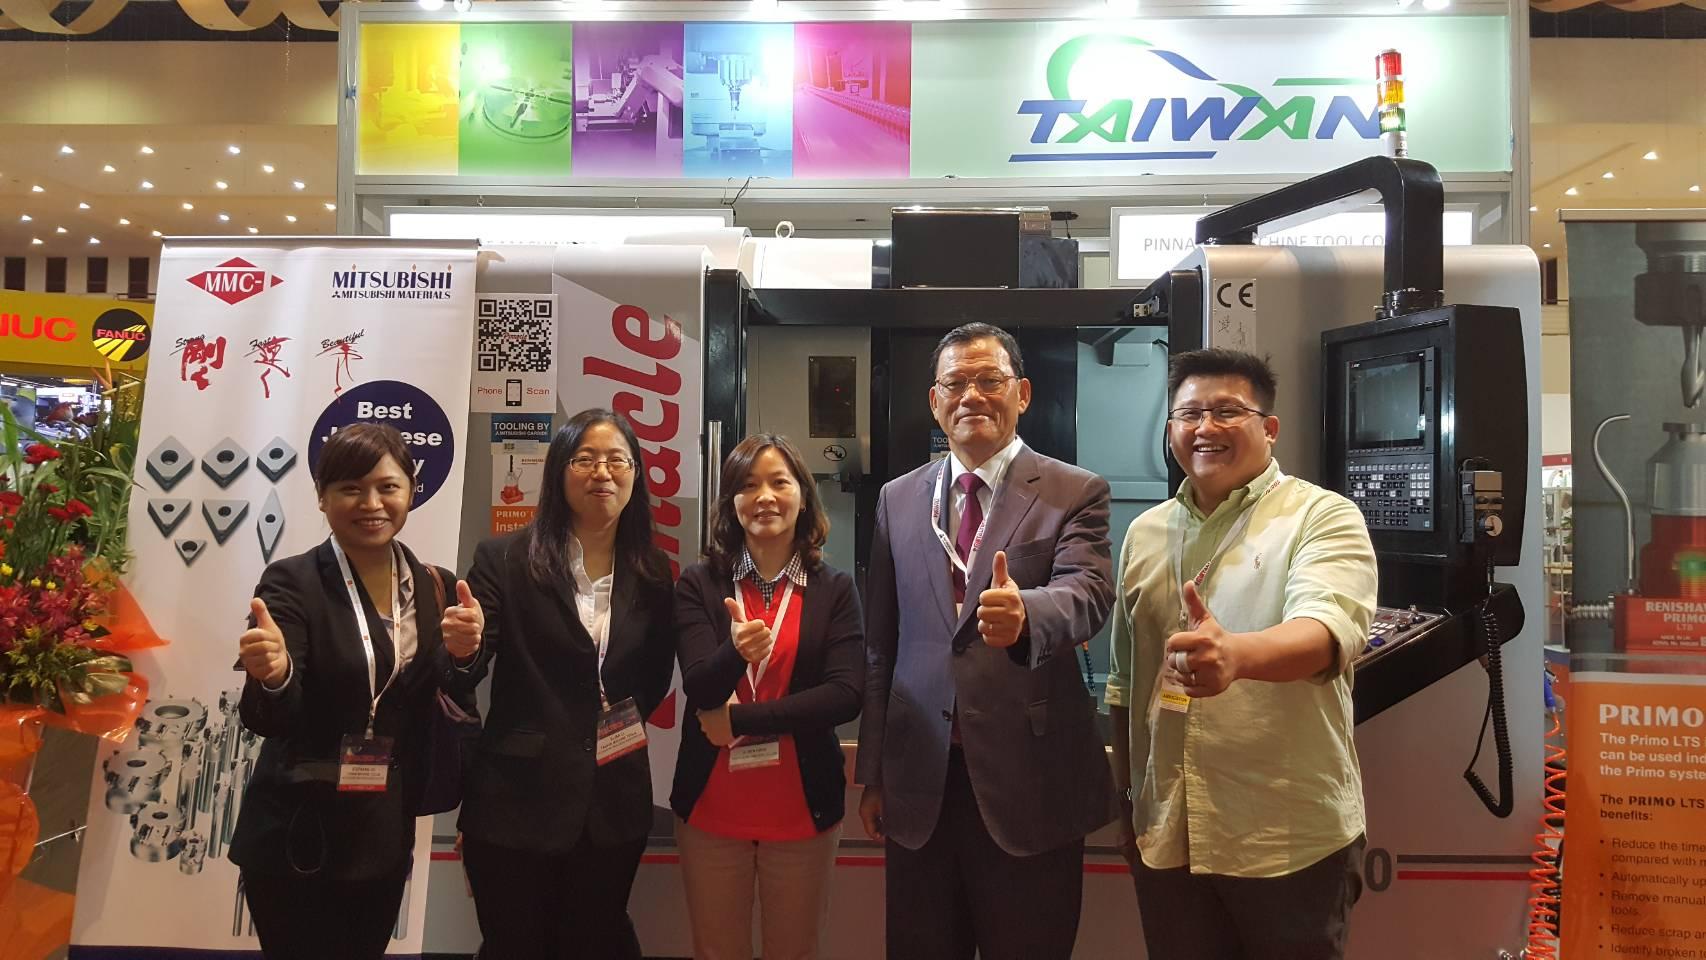  Representative Chang, James Chi-ping visits the International Machine Tool &amp; Metalworking Technology Exhibition (METALTECH 2017) at Putra World Trade Centre (PWTC) on May 26, 2017